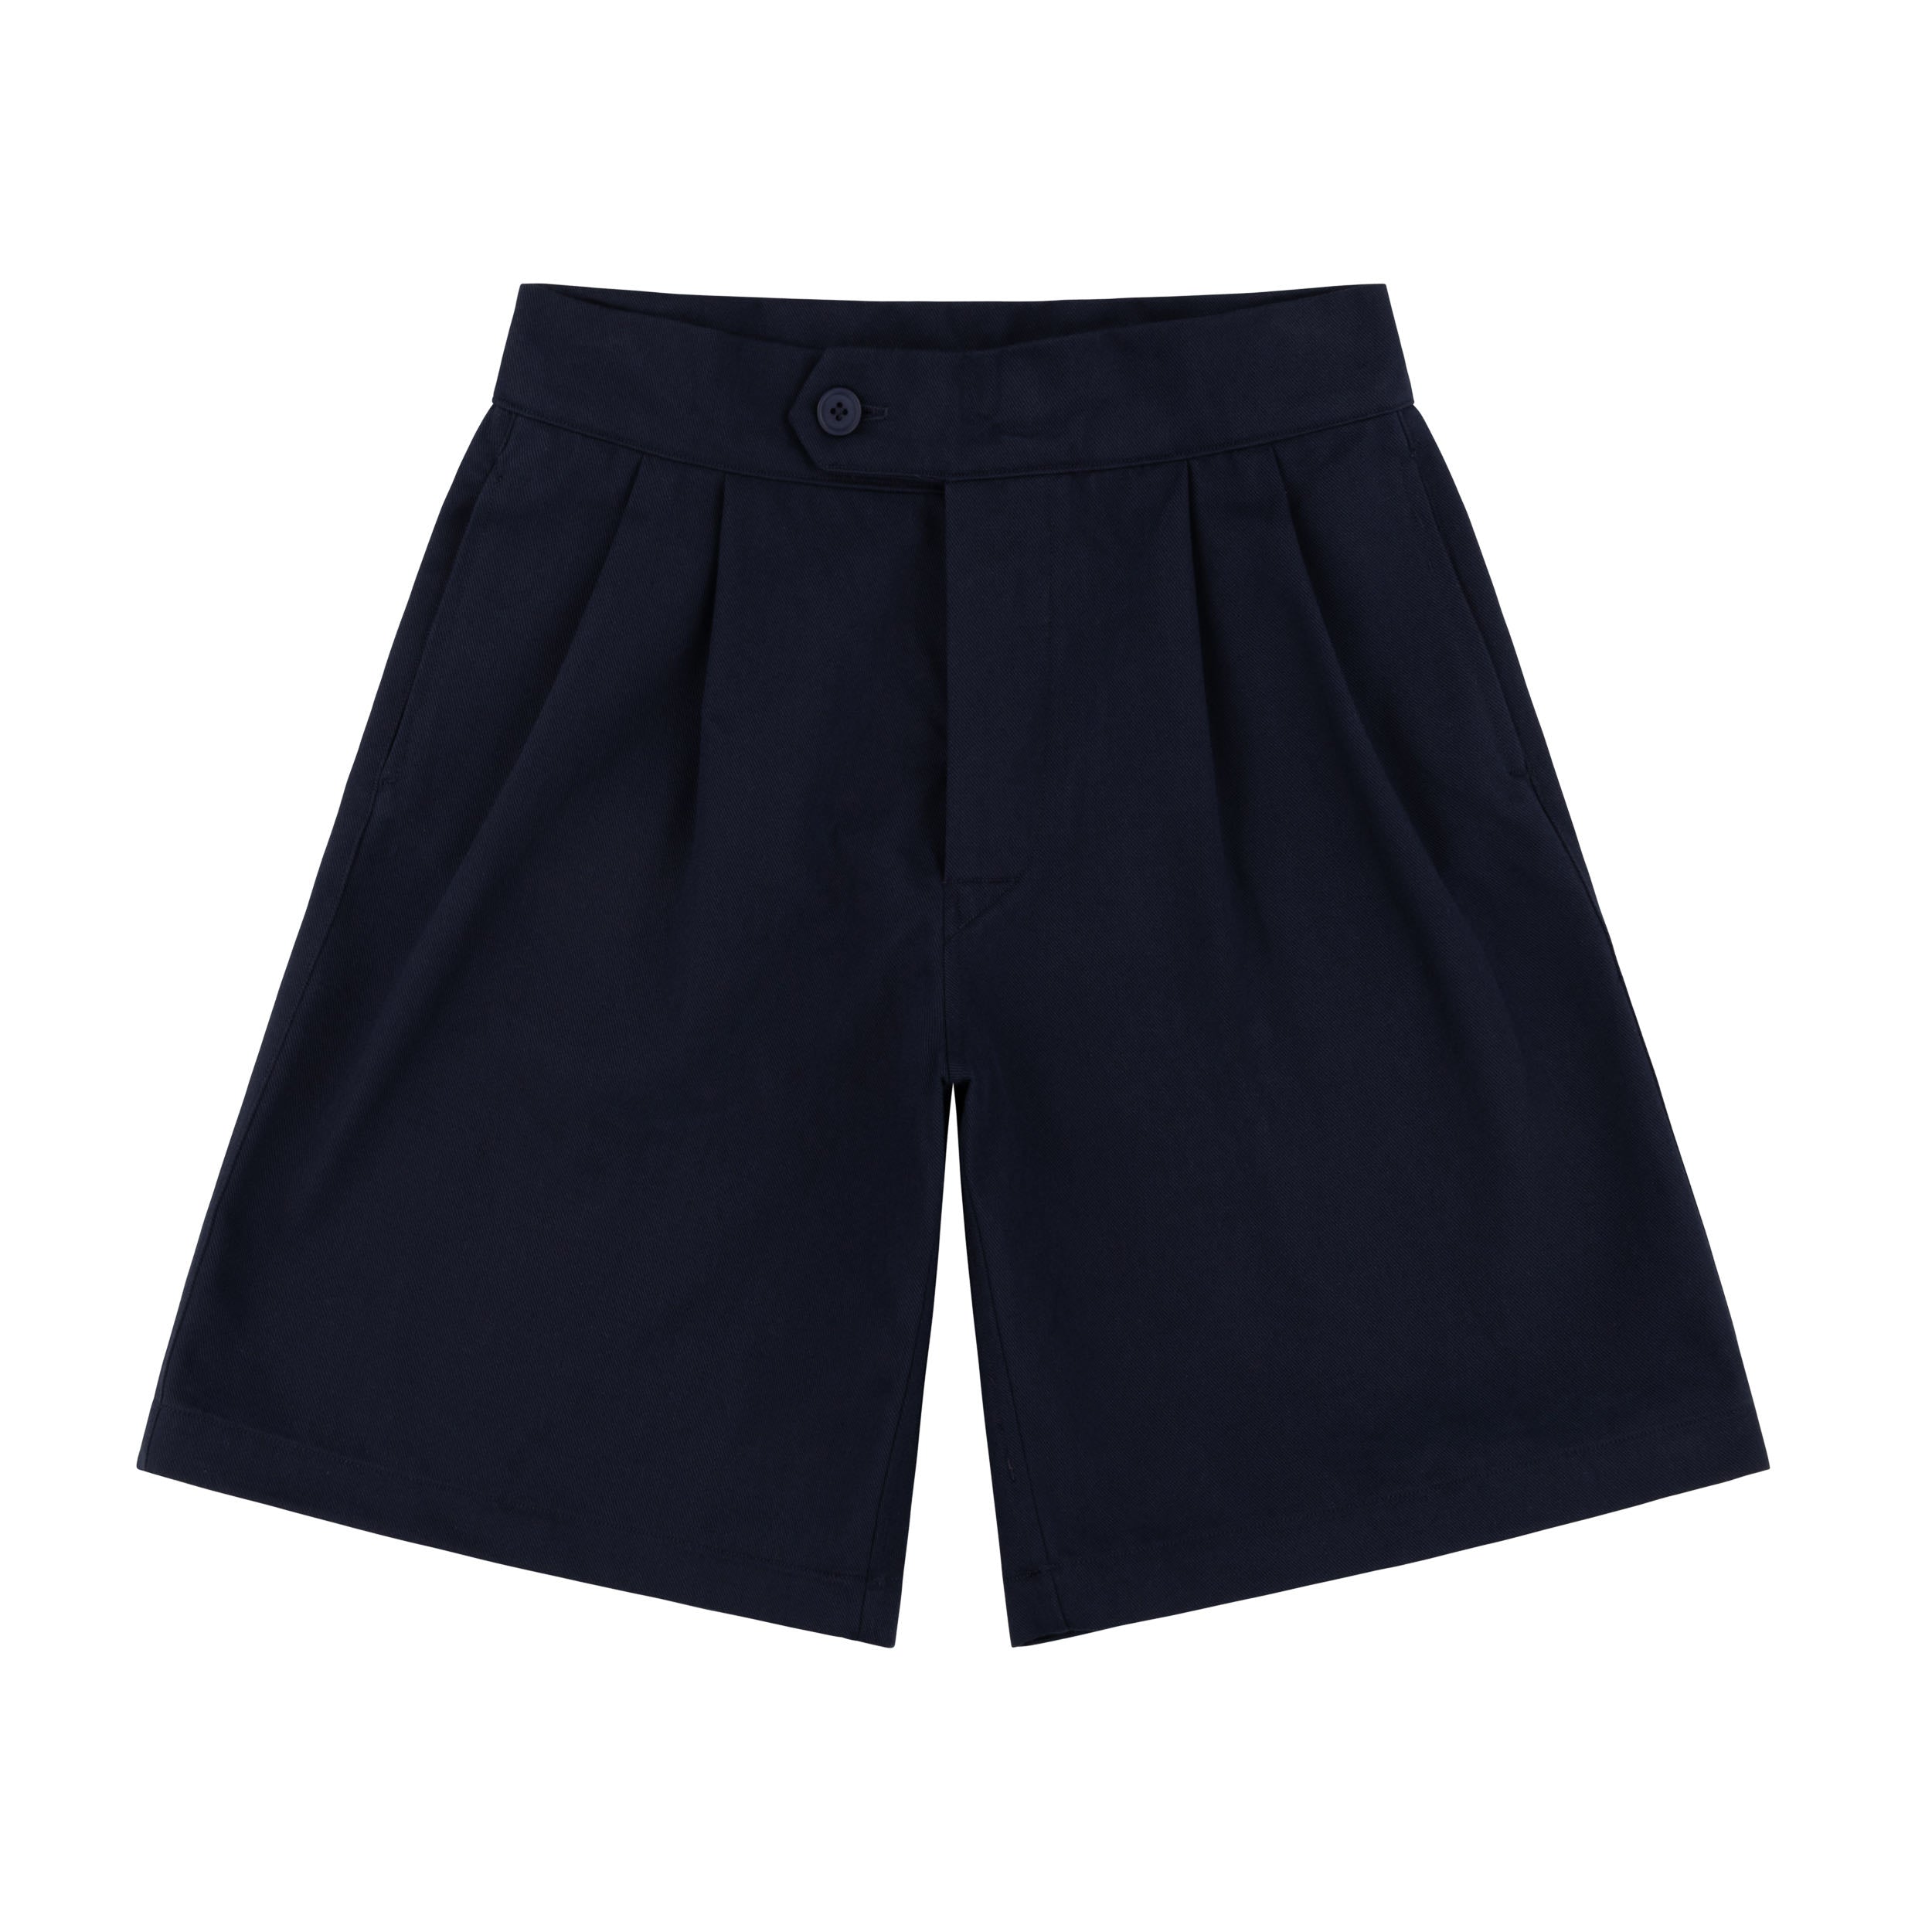 Womens Carrier Company Ladies Shorts in Navy